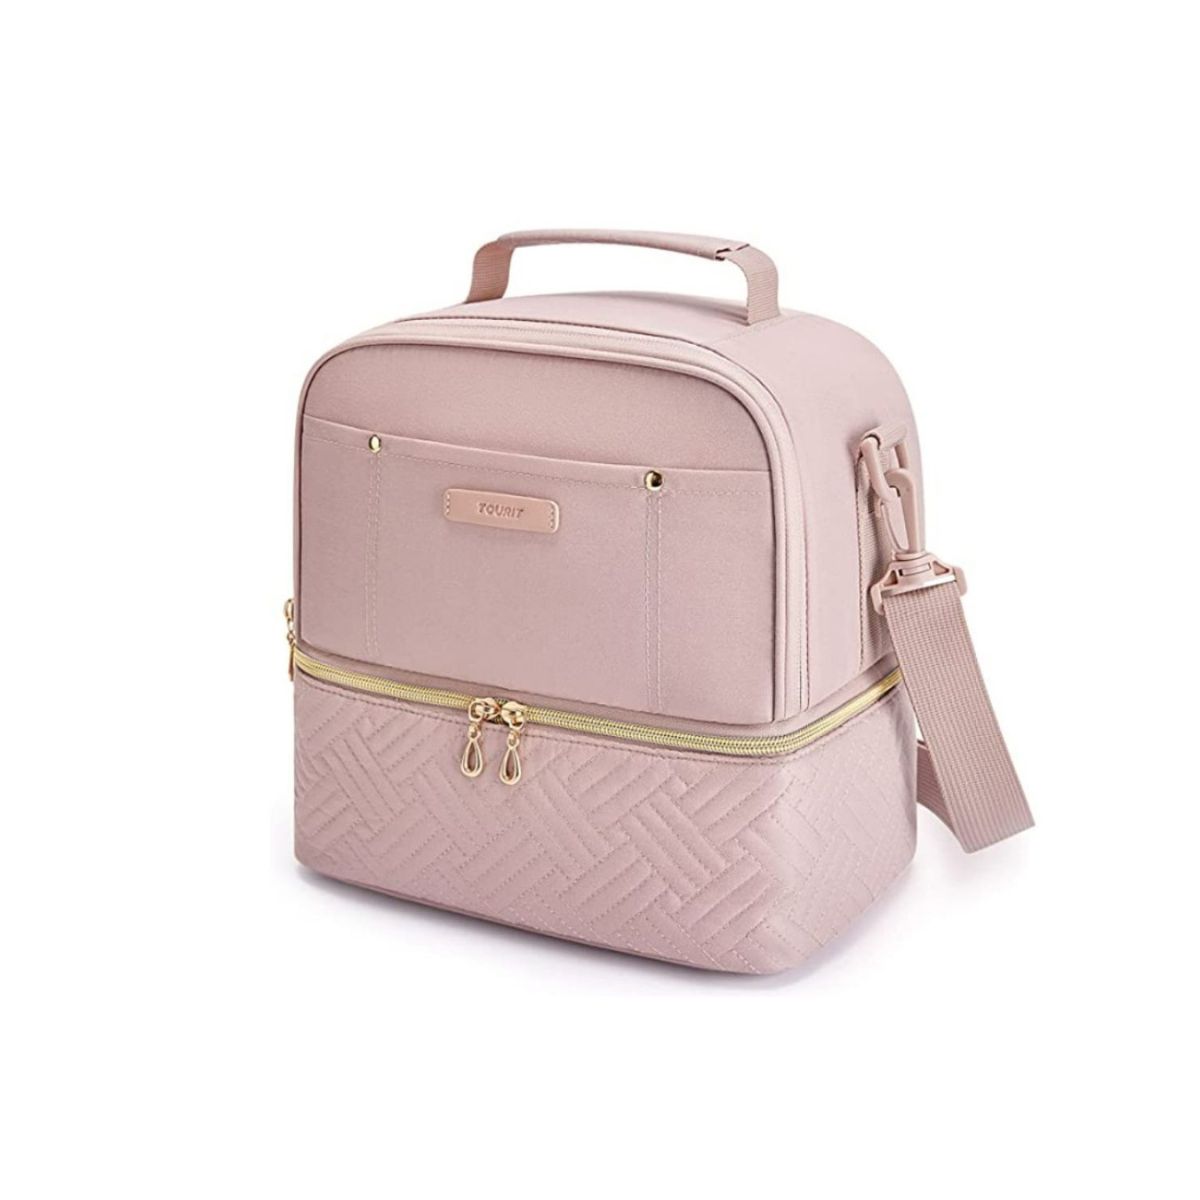 Pale pink lunchbox with gold zippers